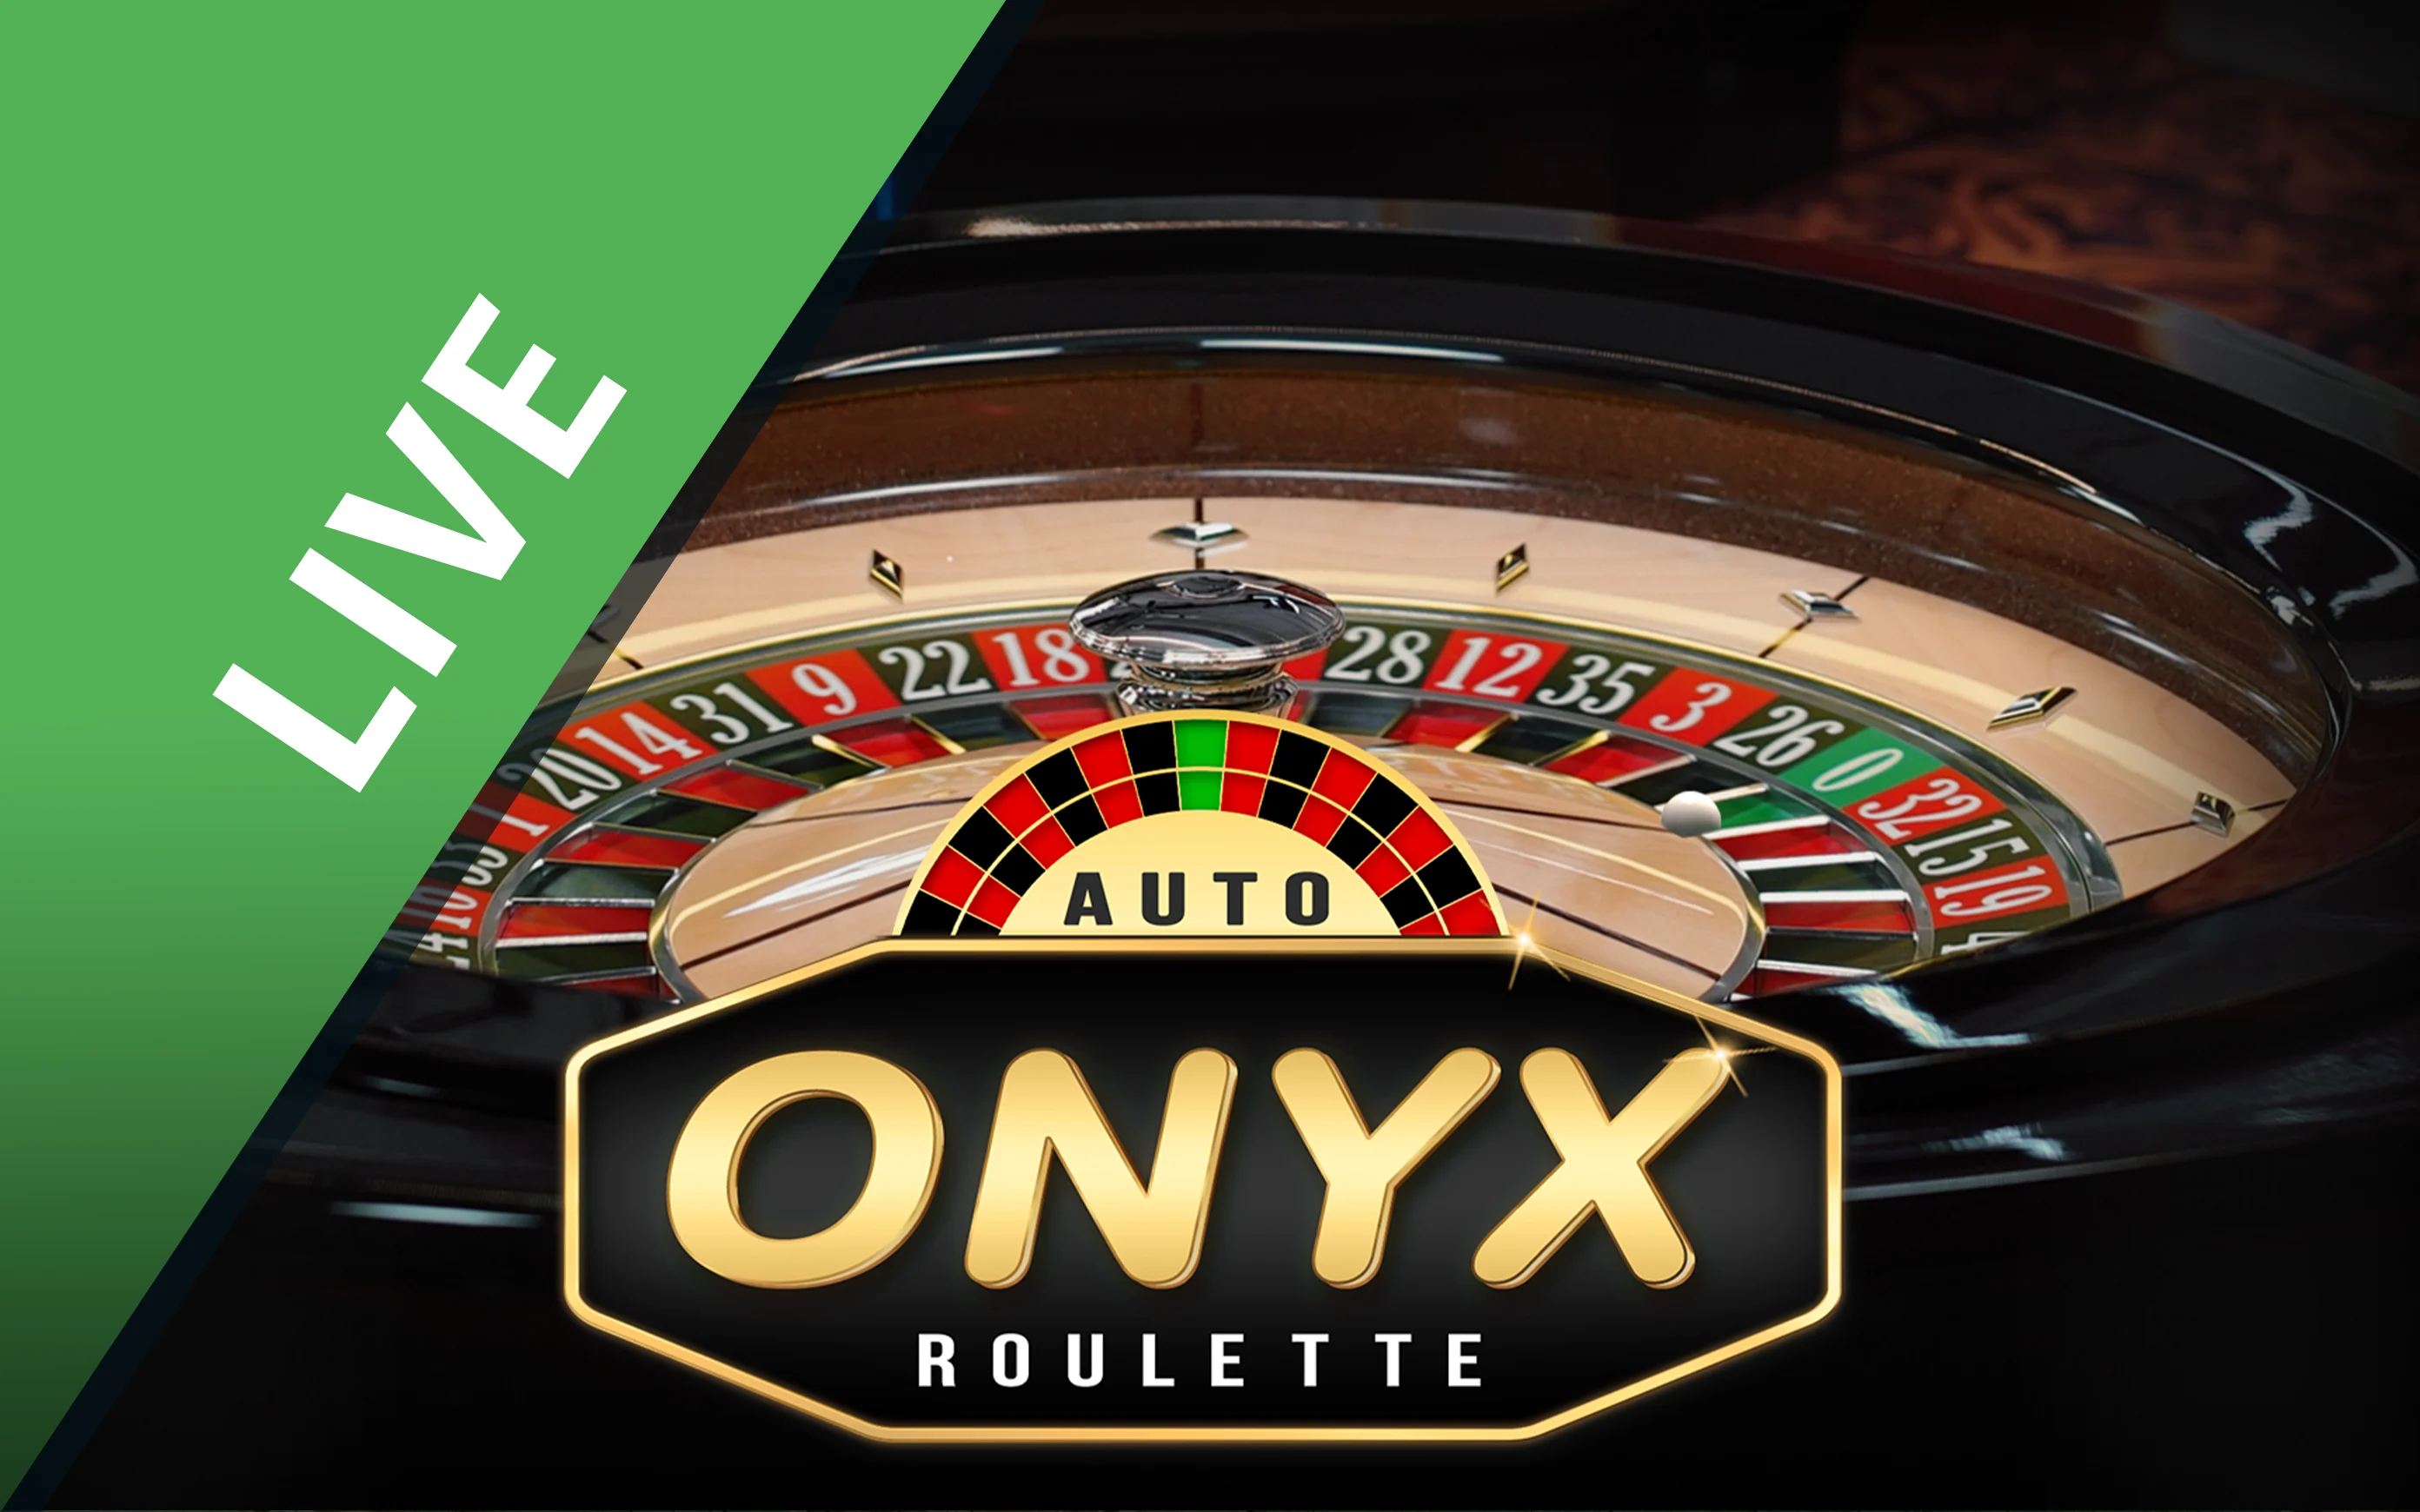 Play Onyx Roulette on Starcasino.be online casino